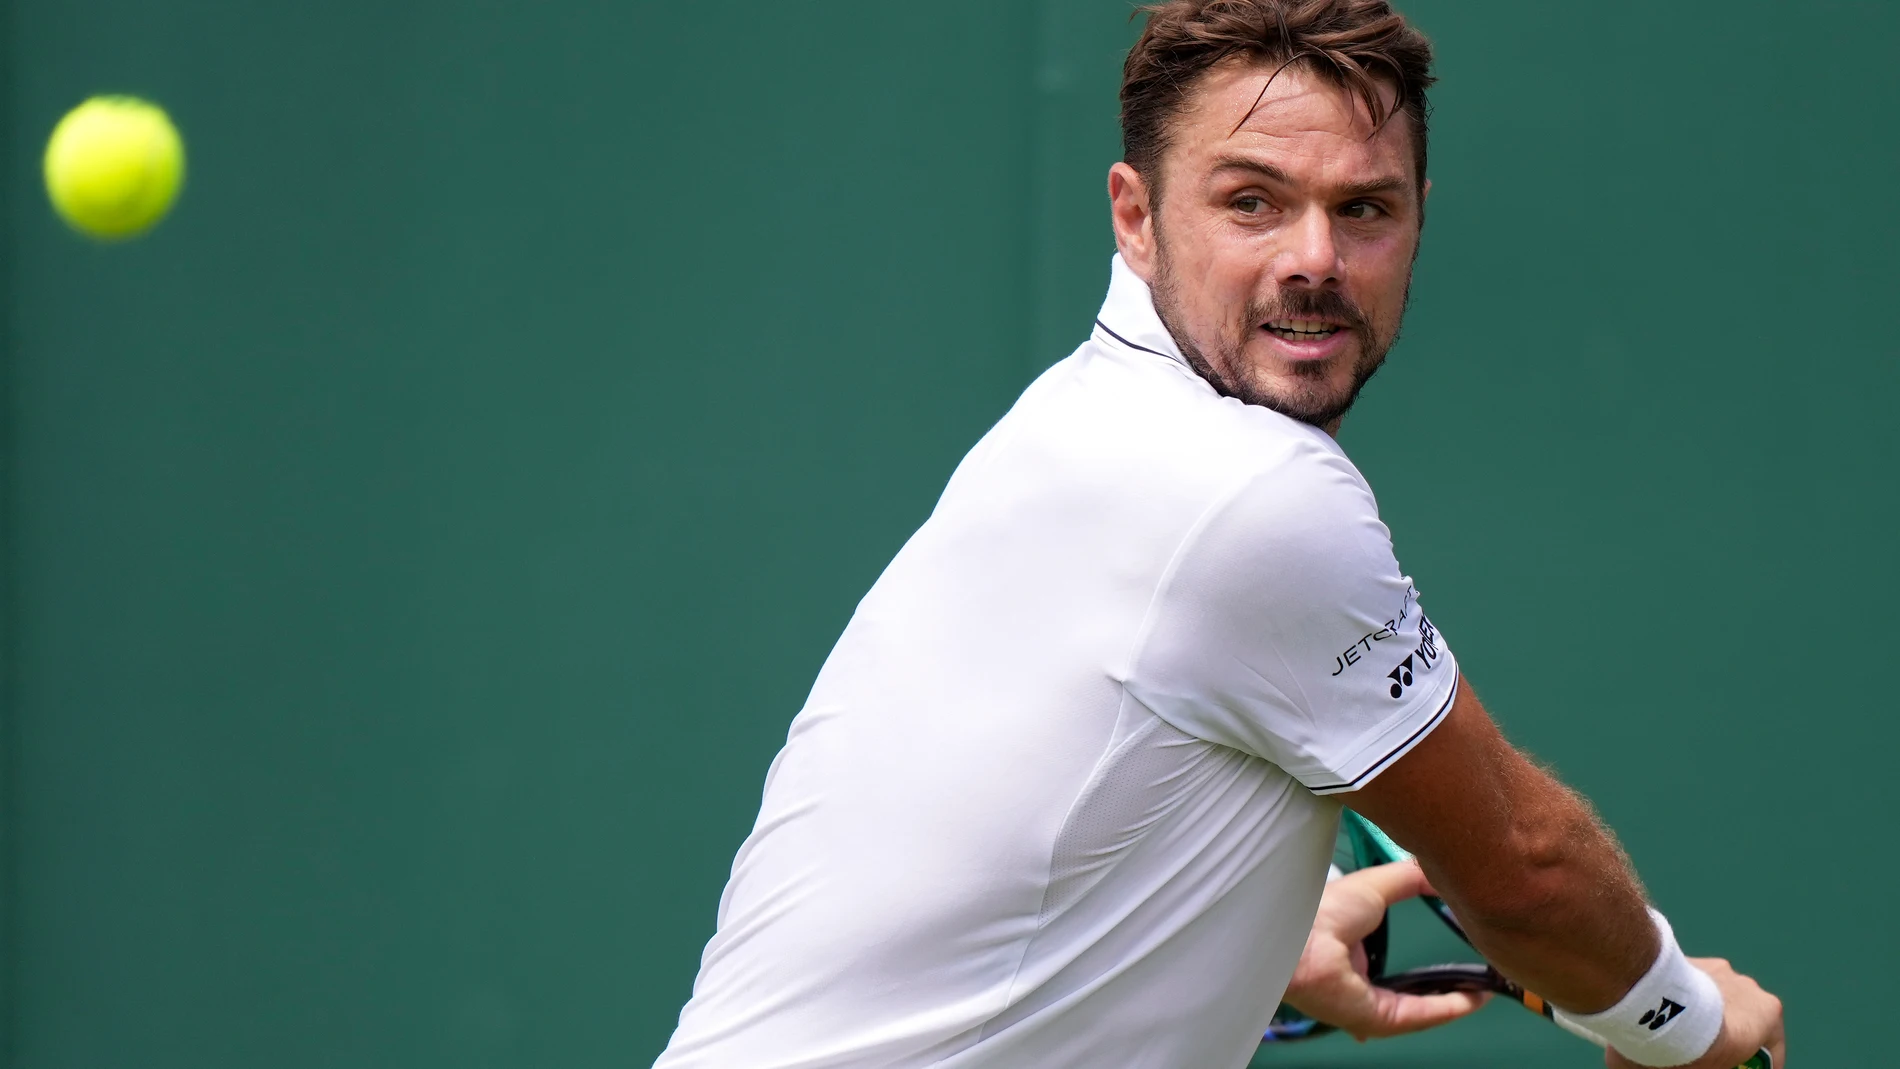 Switzerland's Stan Wawrinka returns to Argentina's Tomas Martín Etcheverry in a men's singles match on day four of the Wimbledon tennis championships in London, Thursday, July 6, 2023. (AP Photo/Alberto Pezzali)